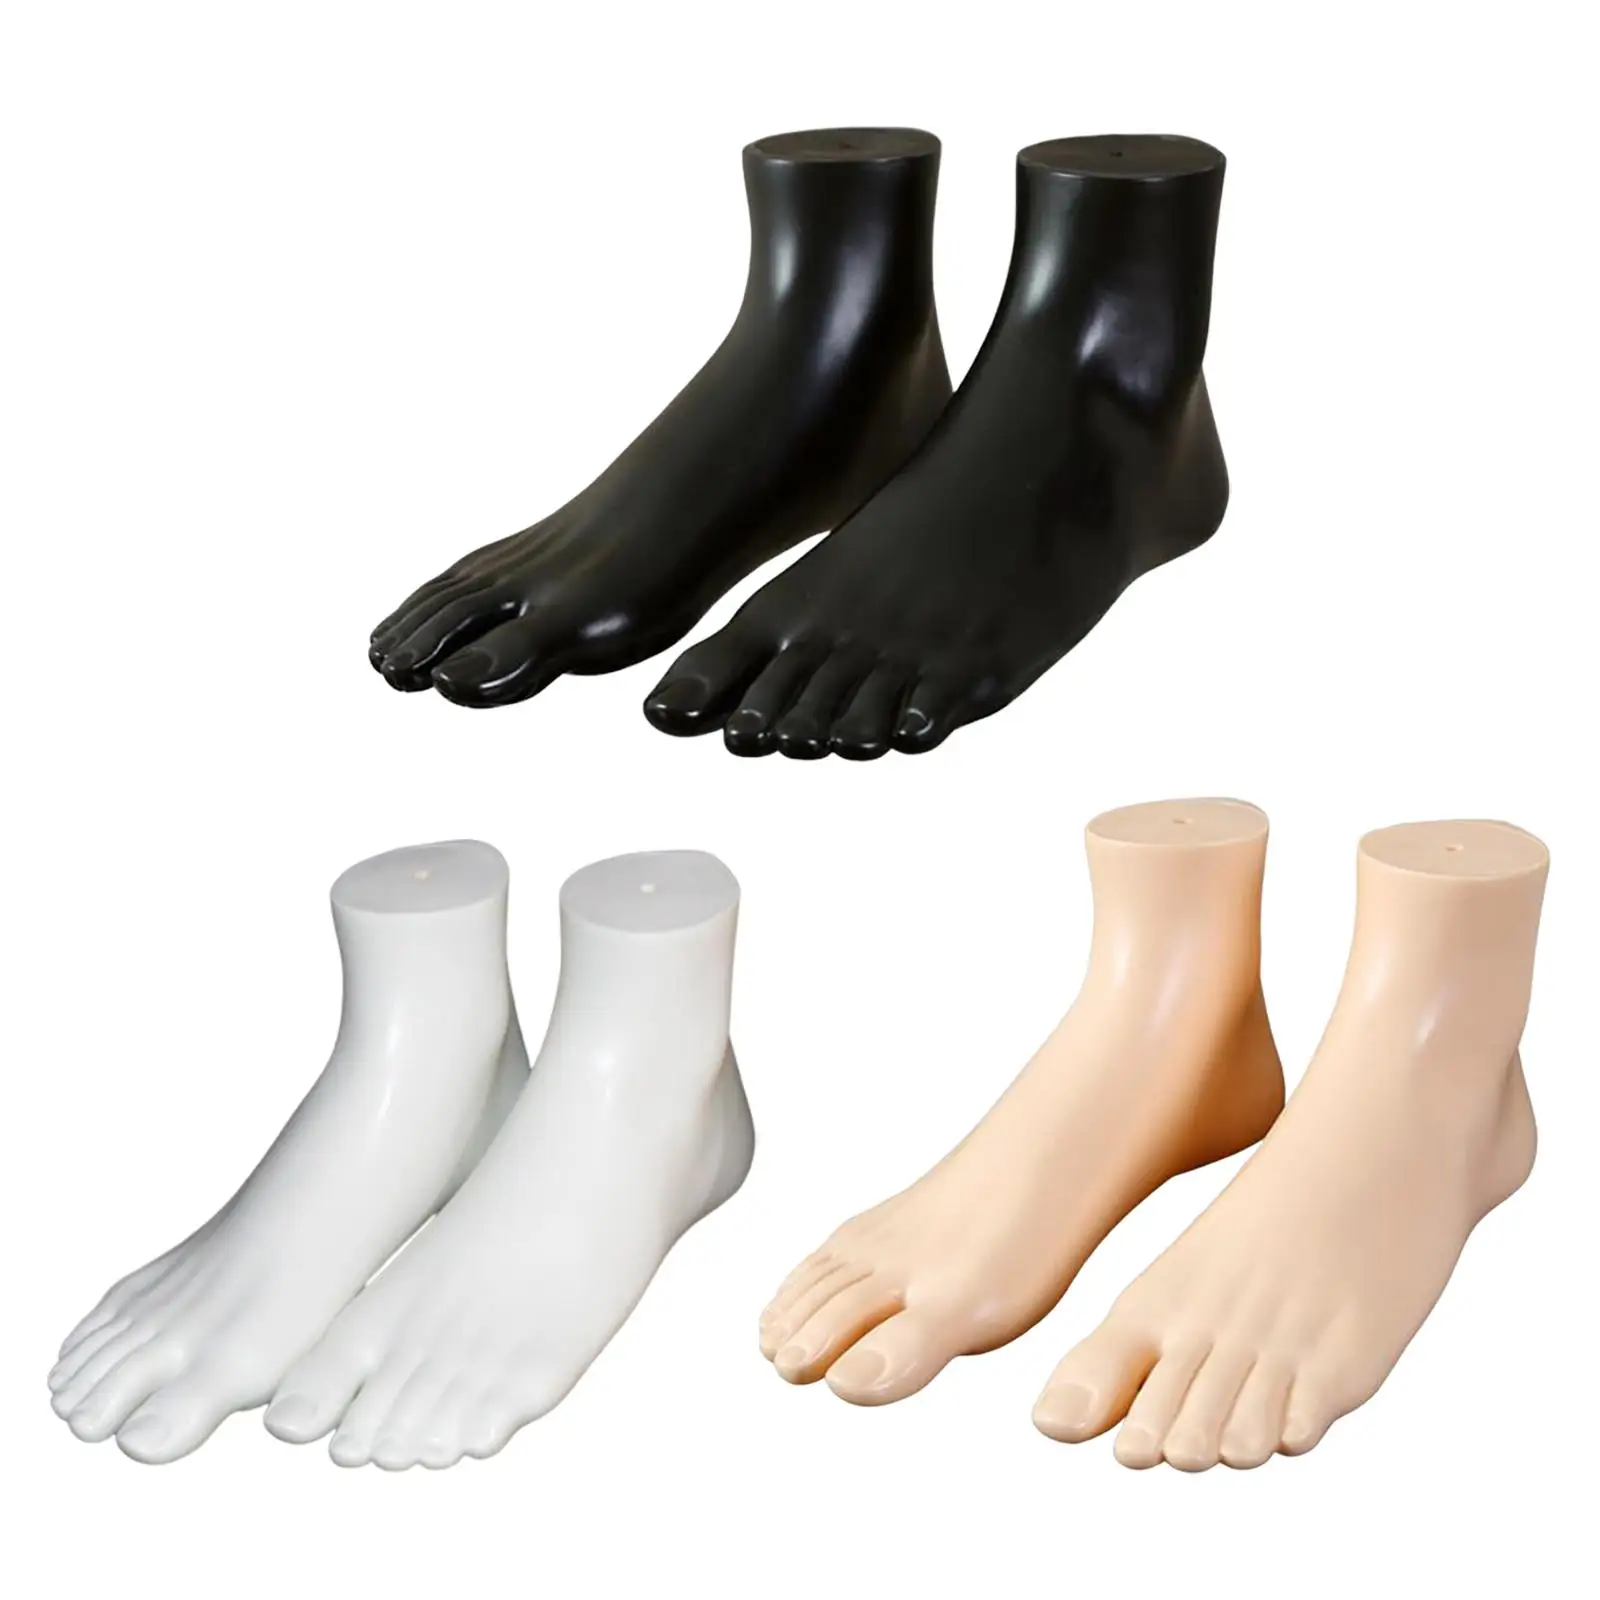 A Pair Mannequin Adult Feet Socks Display Props Manikin for Toe Rings Shop